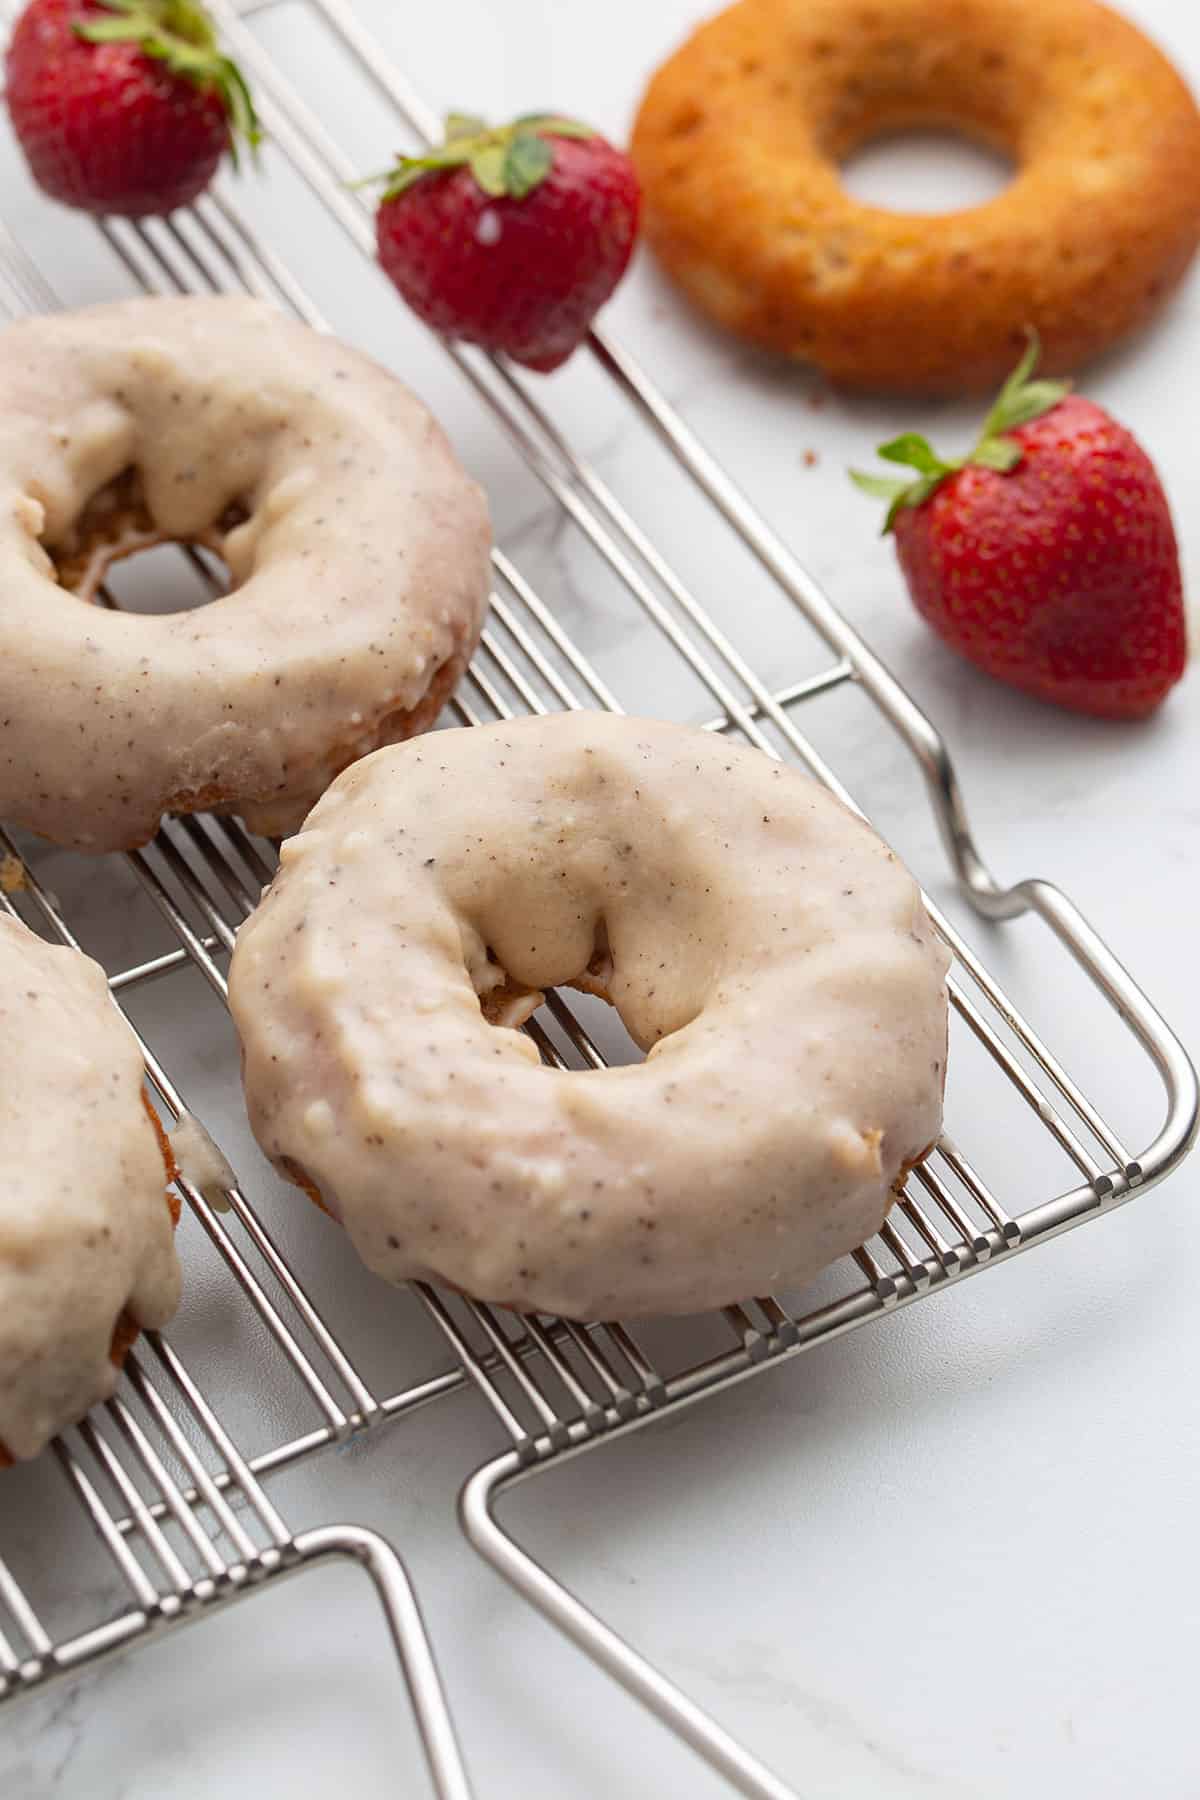 Keto donuts with brown butter glaze on a cooling rack.